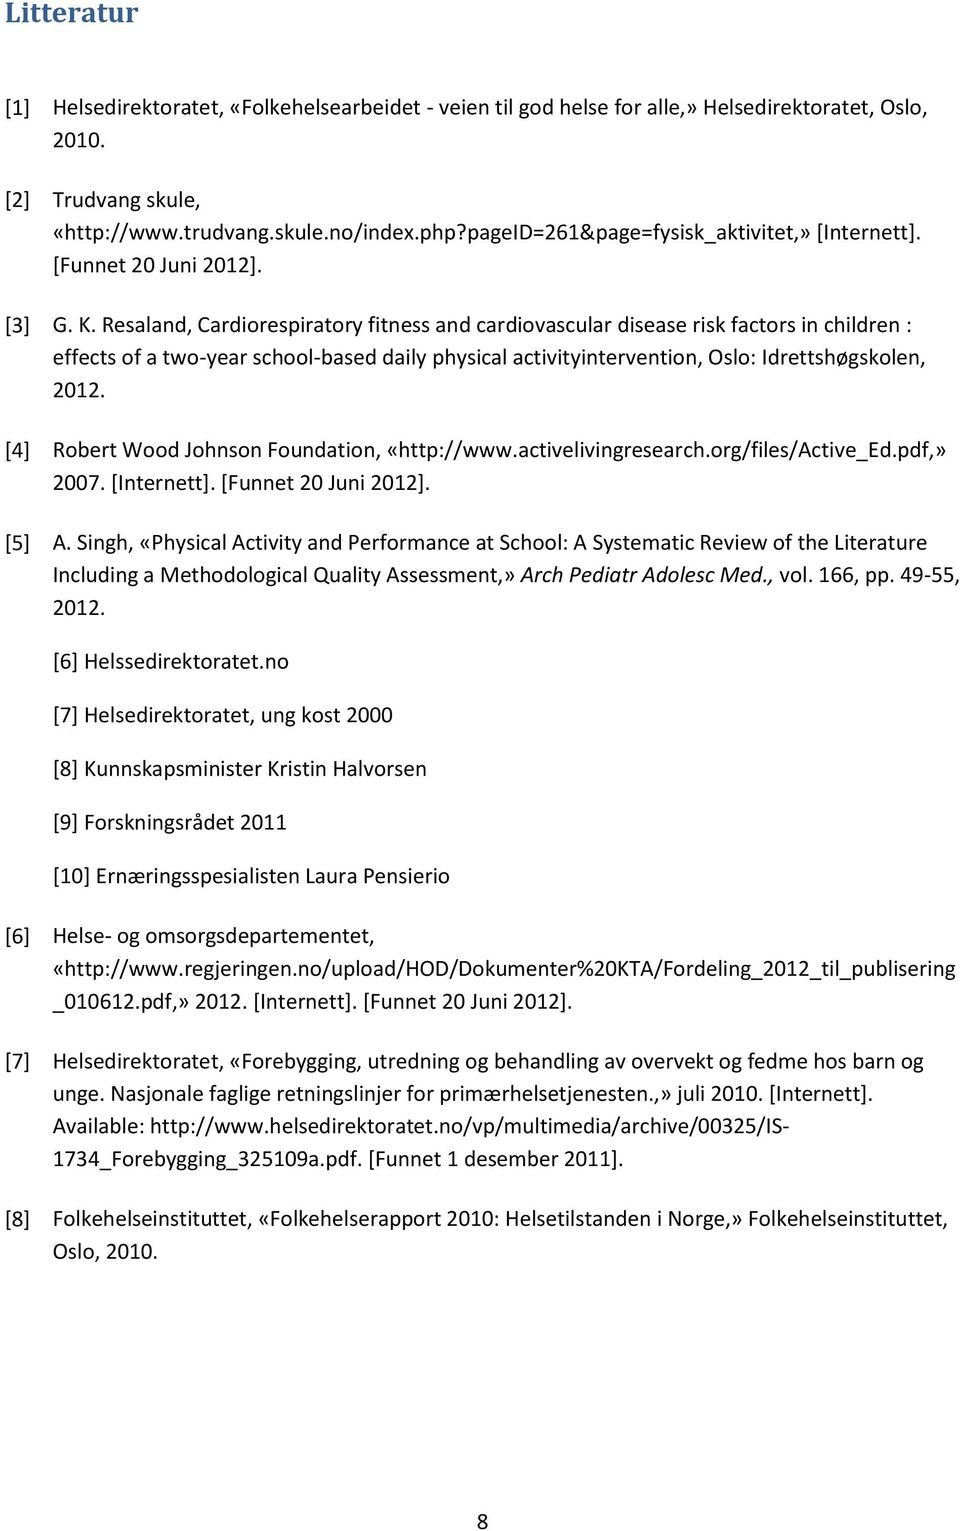 Resaland, Cardiorespiratory fitness and cardiovascular disease risk factors in children : effects of a two-year school-based daily physical activityintervention, Oslo: Idrettshøgskolen, 2012.